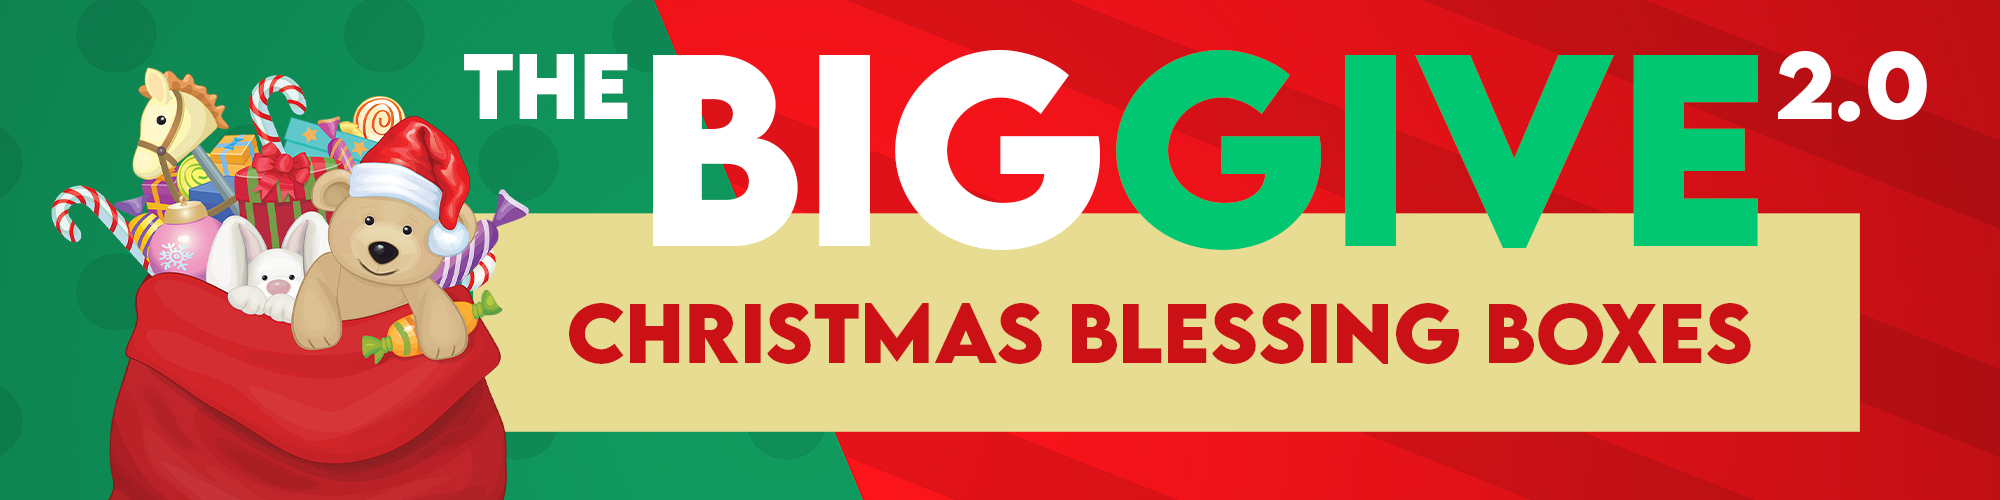 The Big Give 2.0 Christmas Blessing Boxes